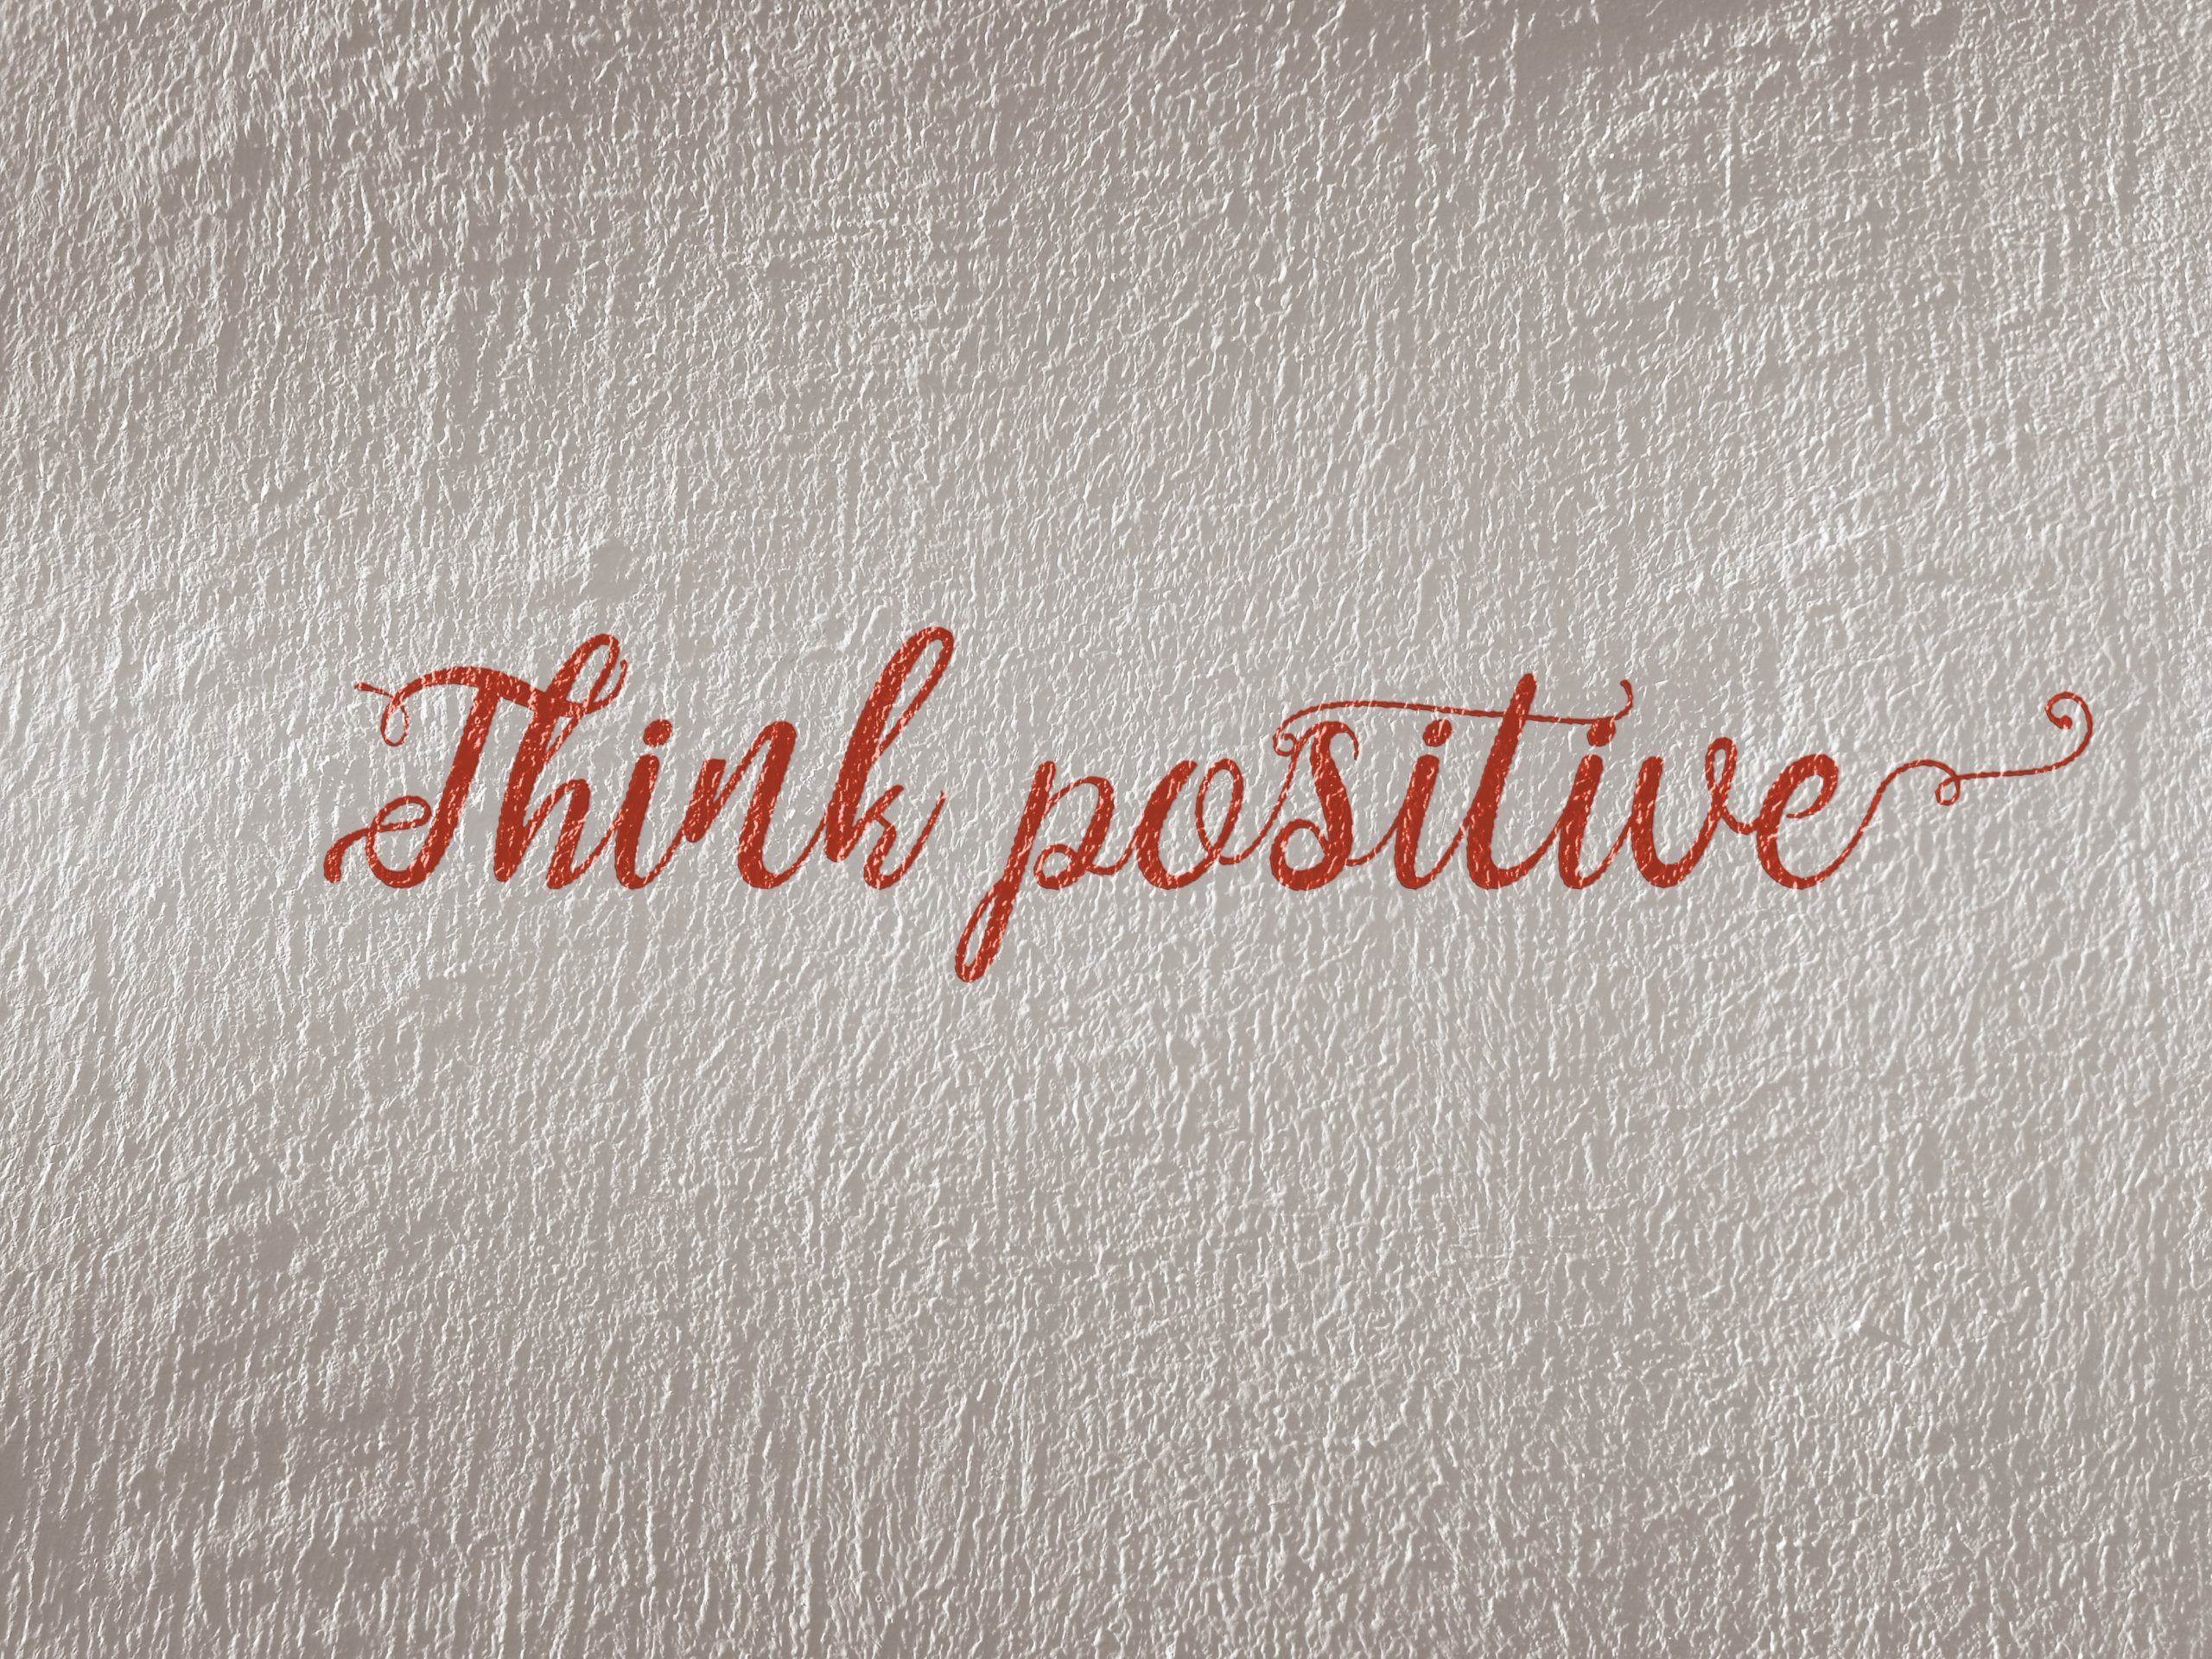 Think positive written in red on a white background 